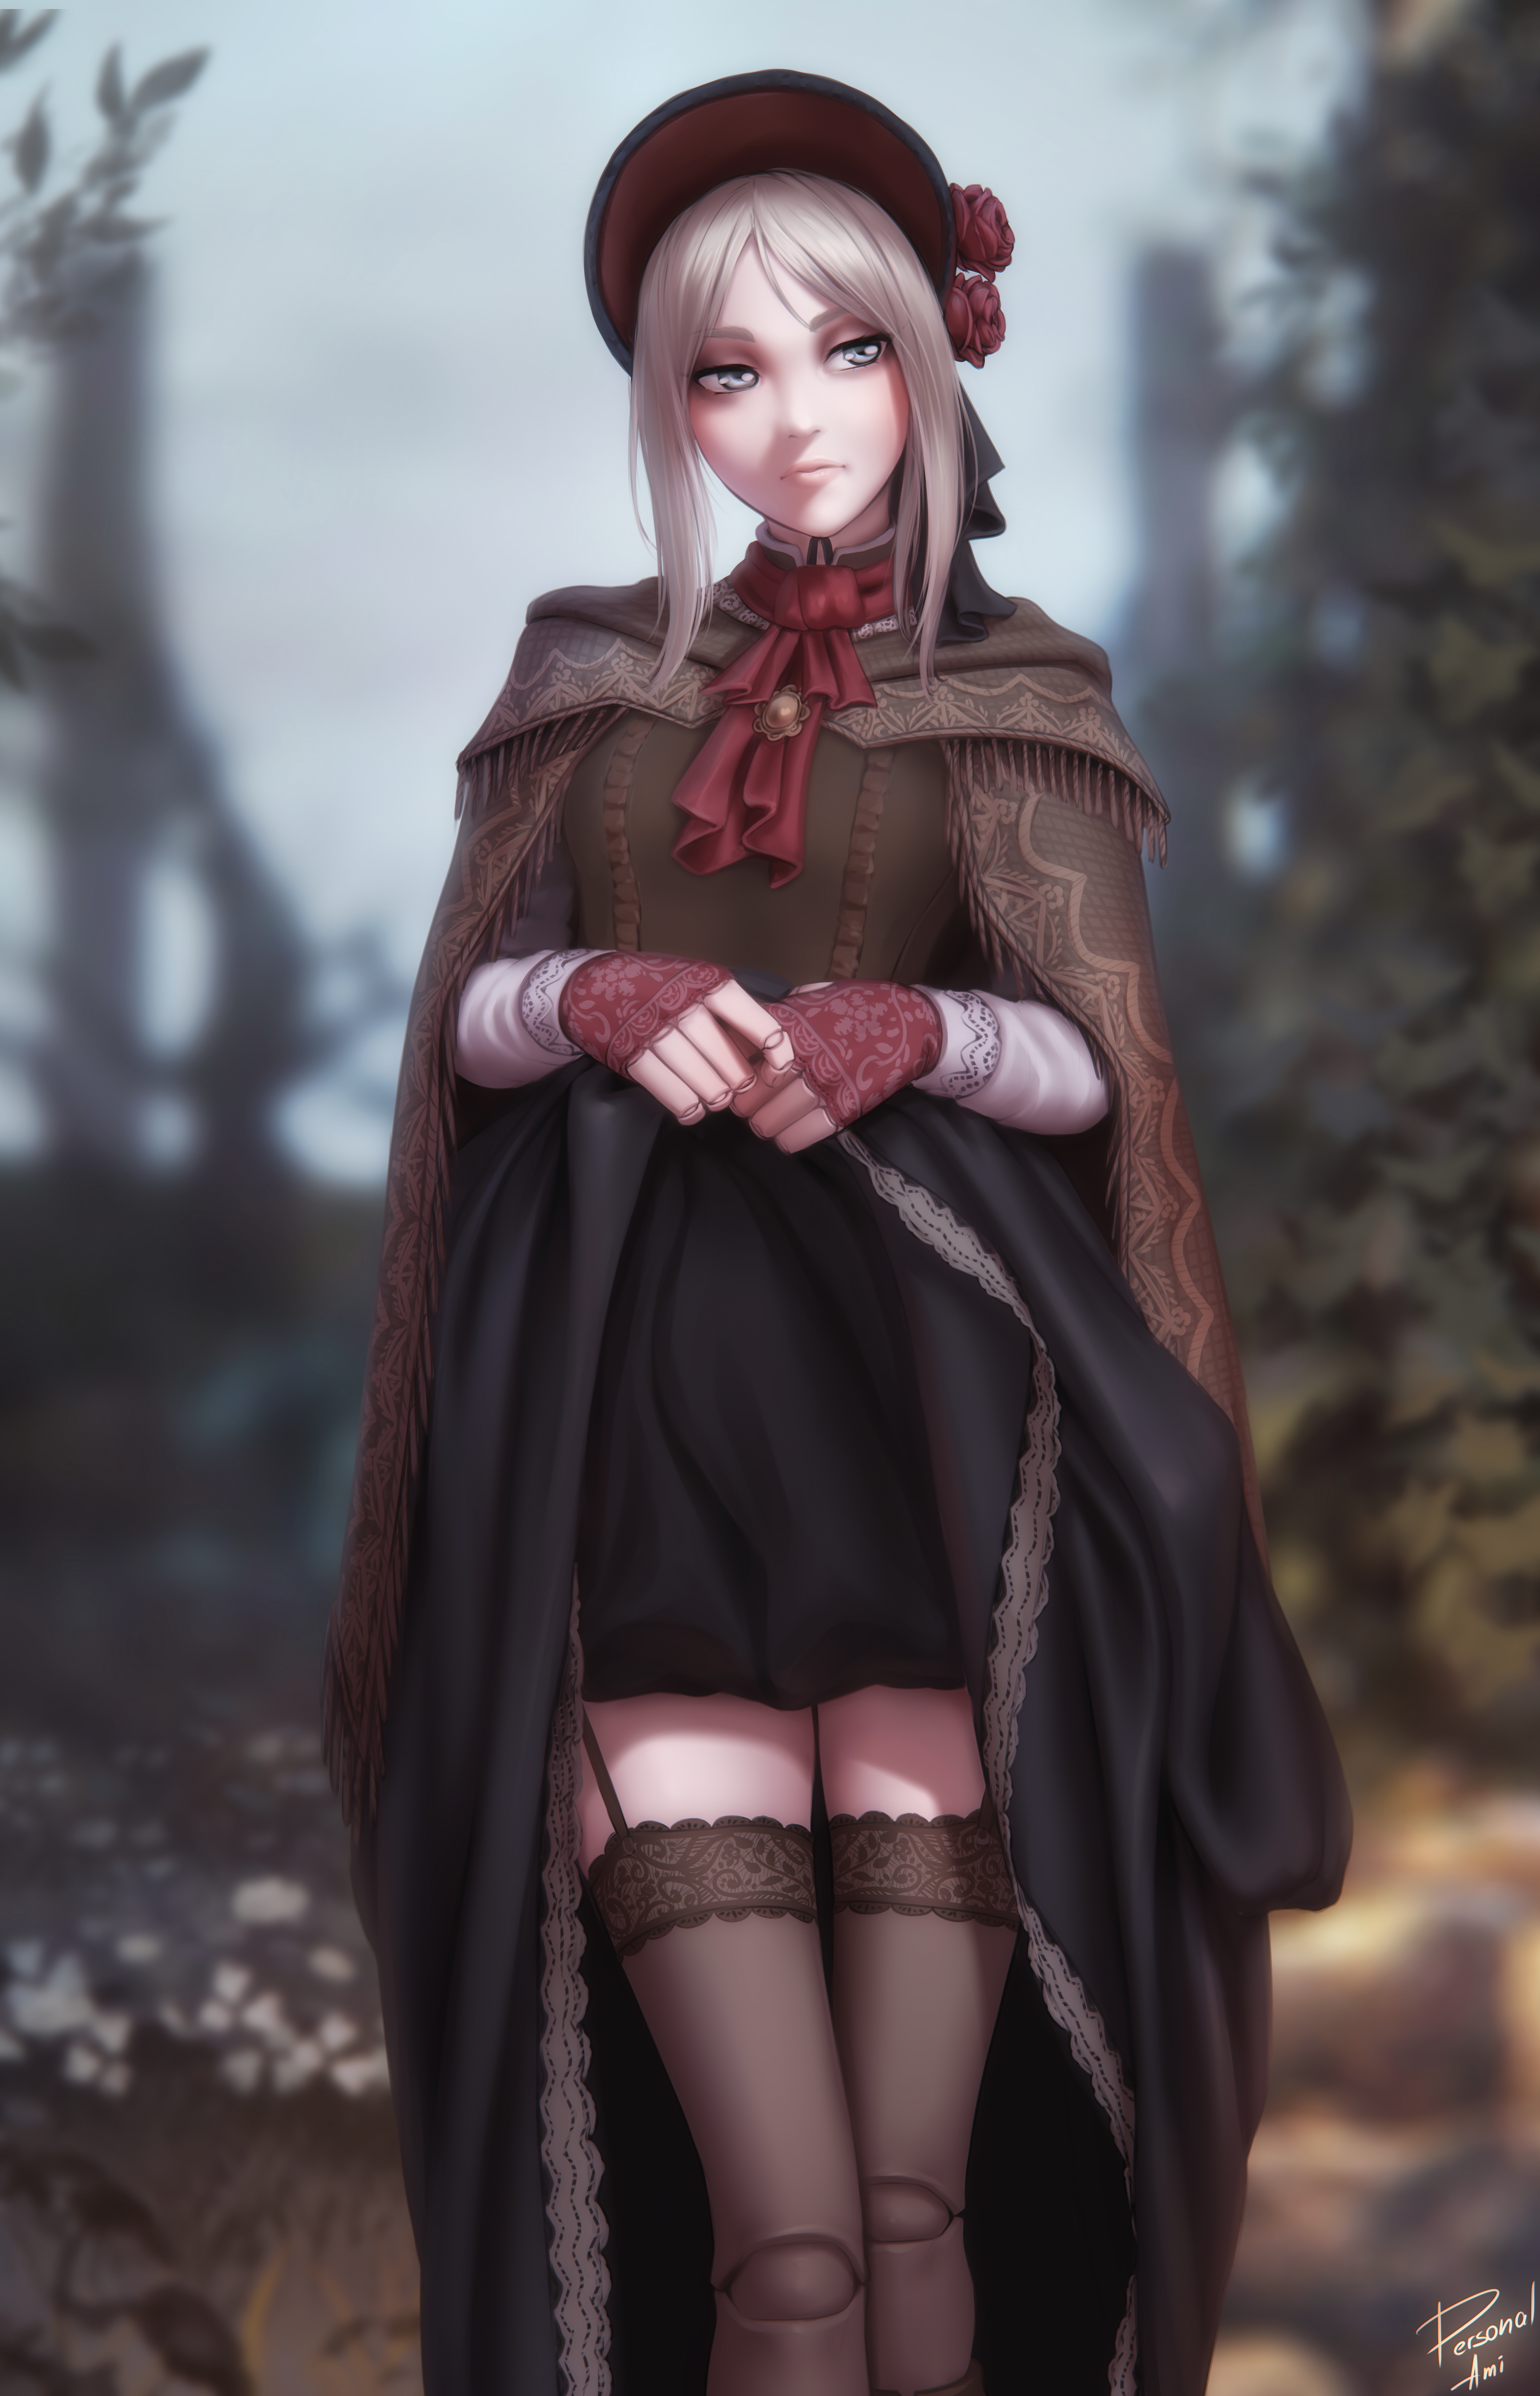 General 4500x7000 Plain Doll (Bloodborne) Plain Doll Bloodborne video game girls video game characters artwork drawing fan art Personal ami video games standing portrait display hat signature stockings looking sideways garter straps depth of field